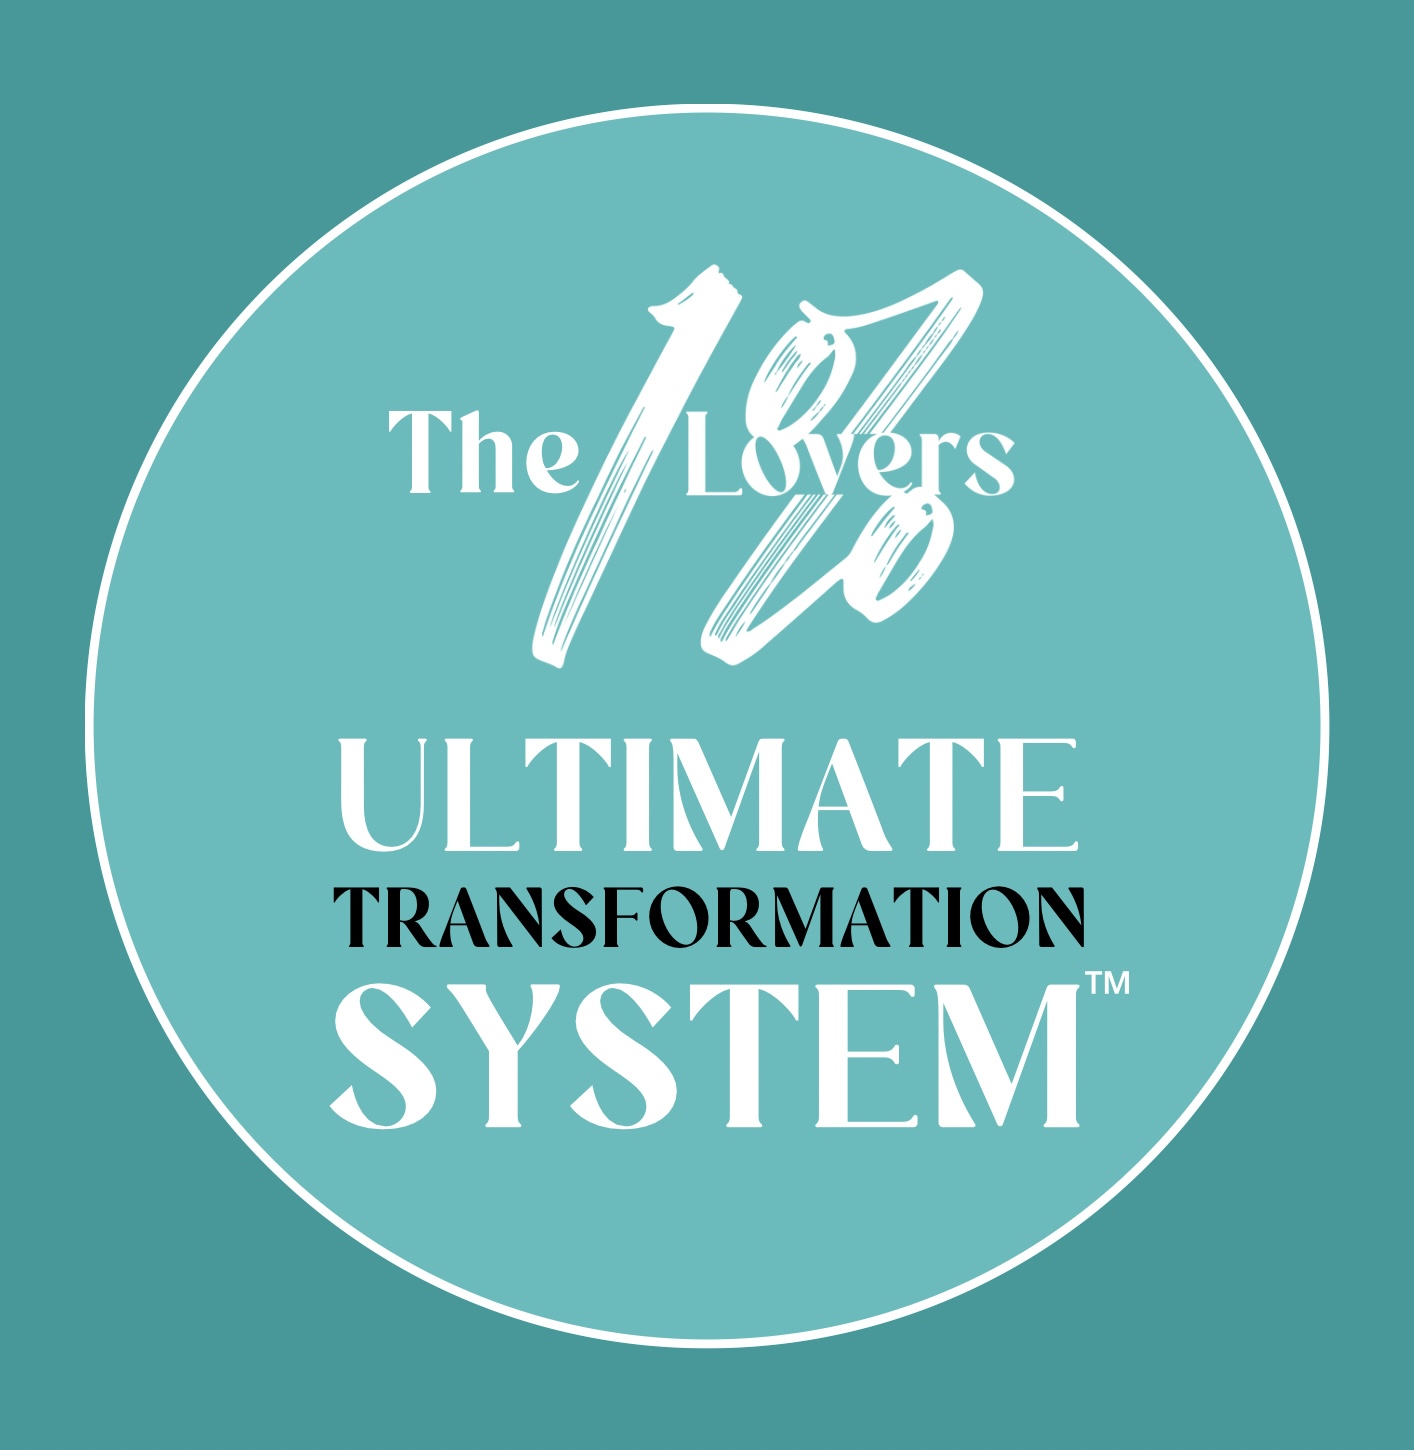 The 1% Lovers Ultimate Transformation System